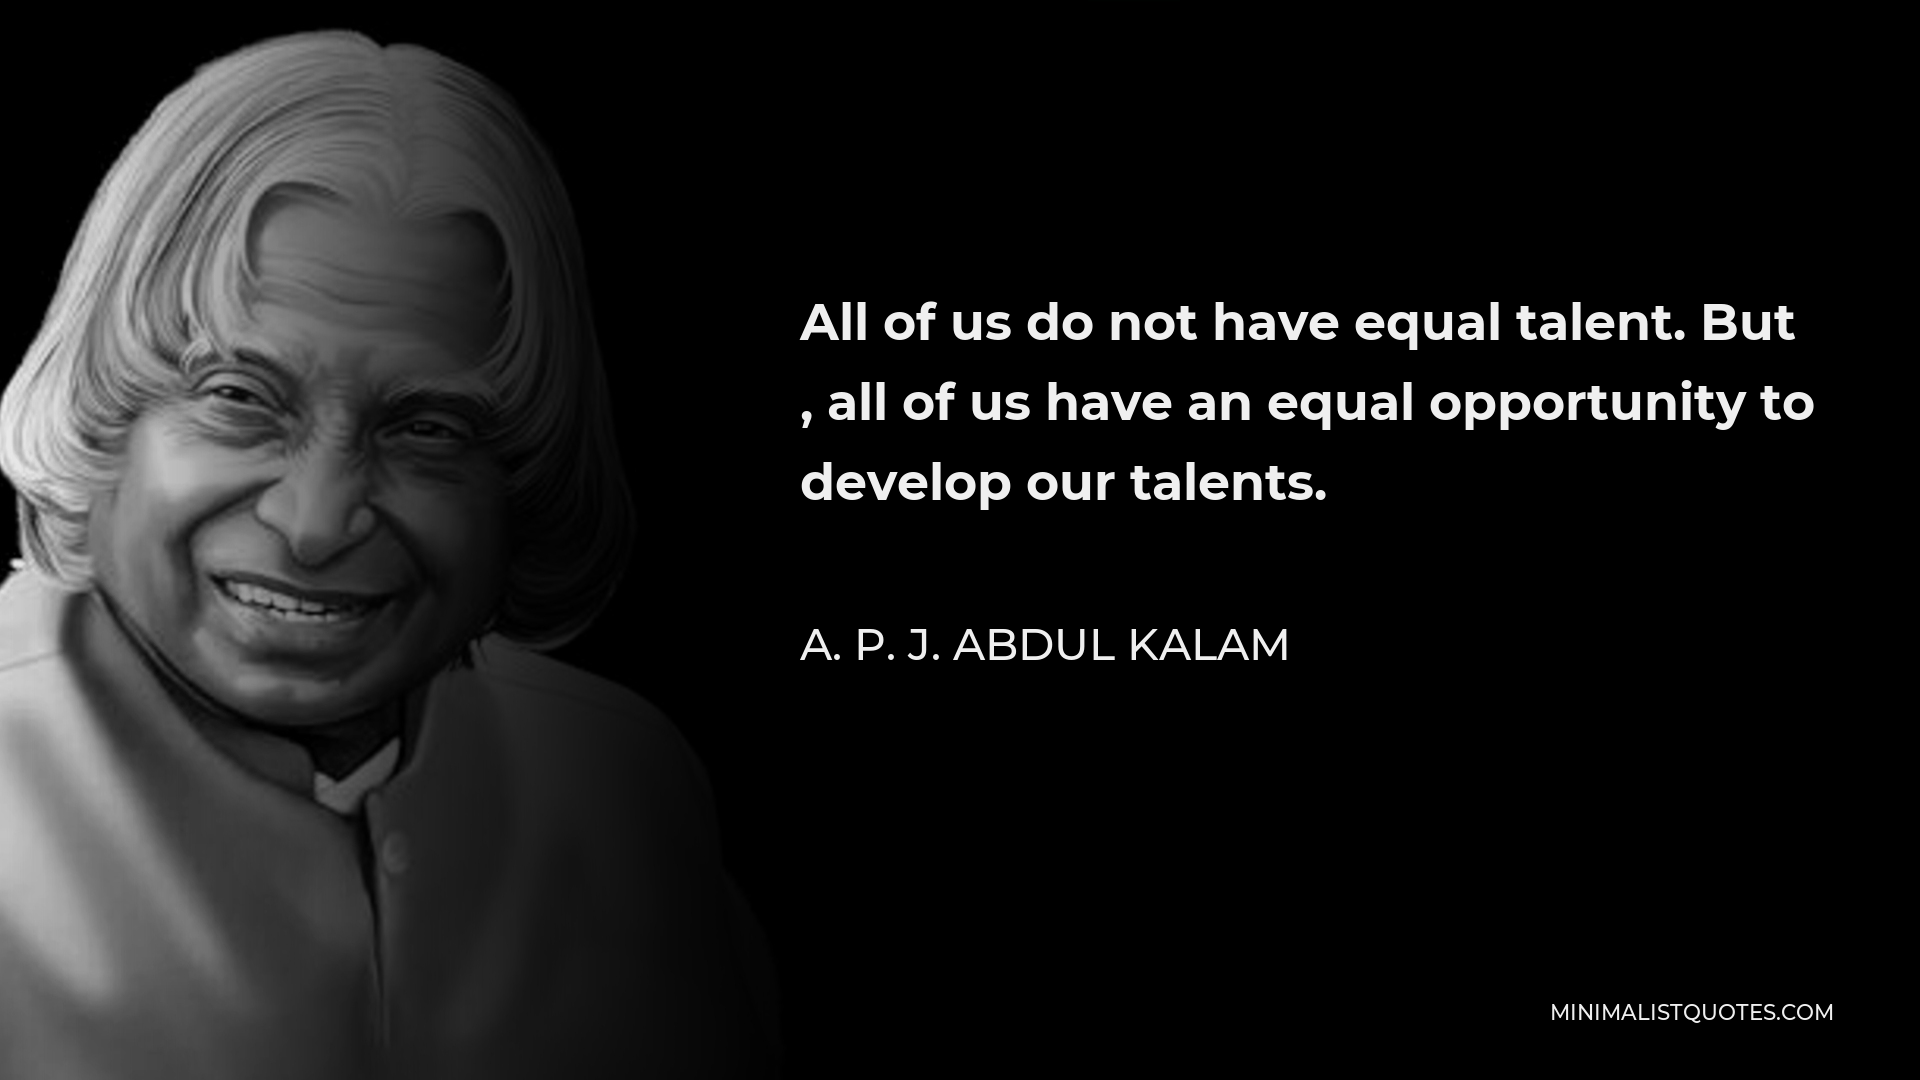 A. P. J. Abdul Kalam Quote - All of us do not have equal talent. But , all of us have an equal opportunity to develop our talents.